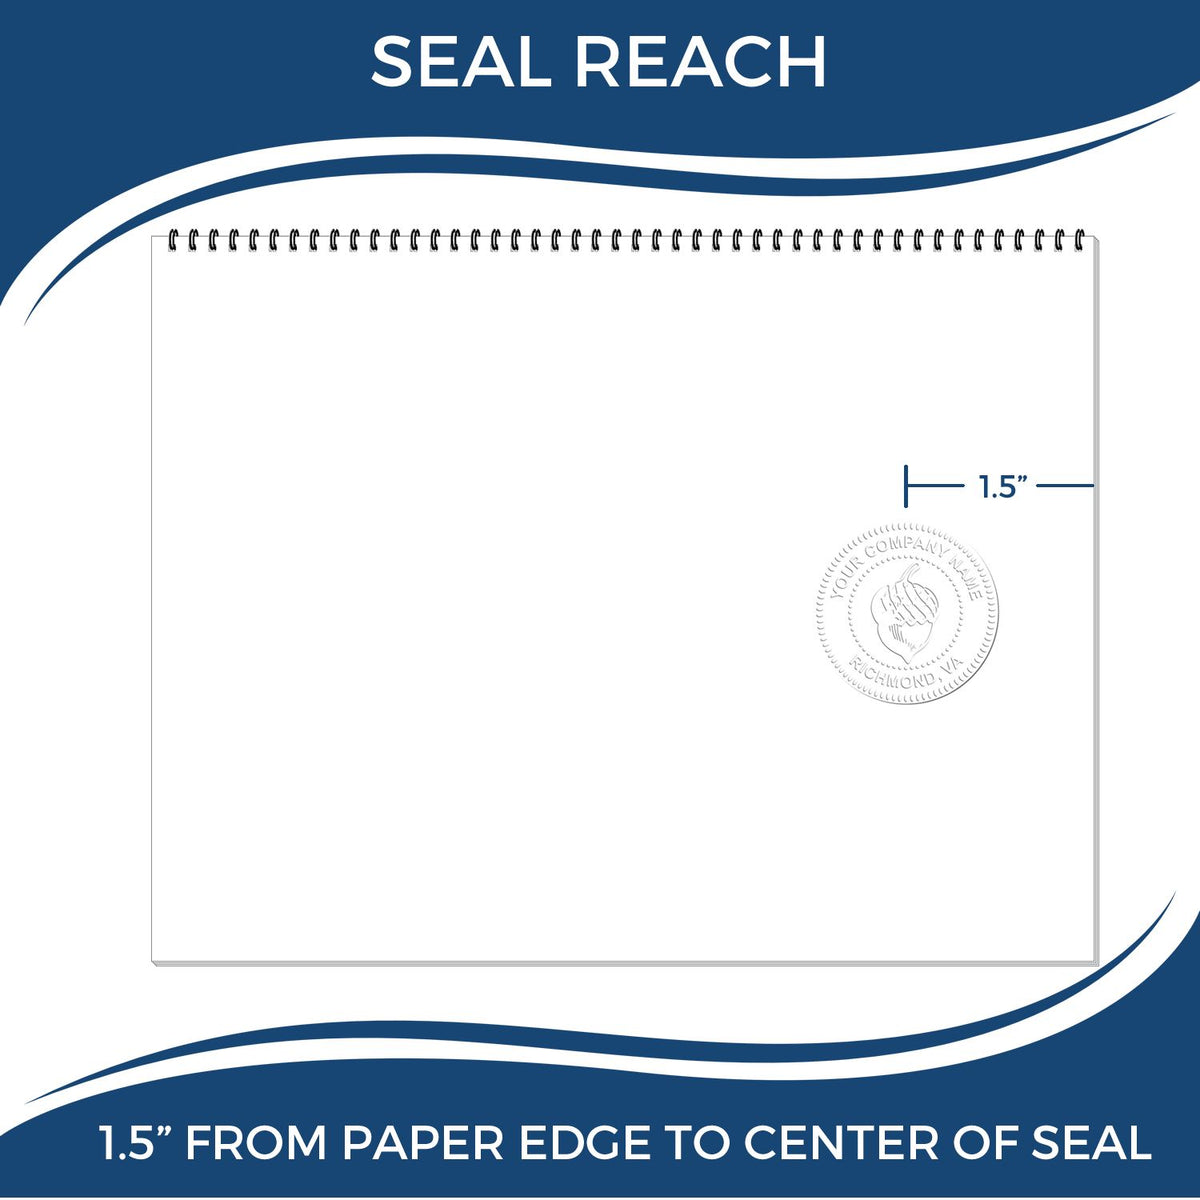 An infographic showing the seal reach which is represented by a ruler and a miniature seal image of the State of Maryland Architectural Seal Embosser